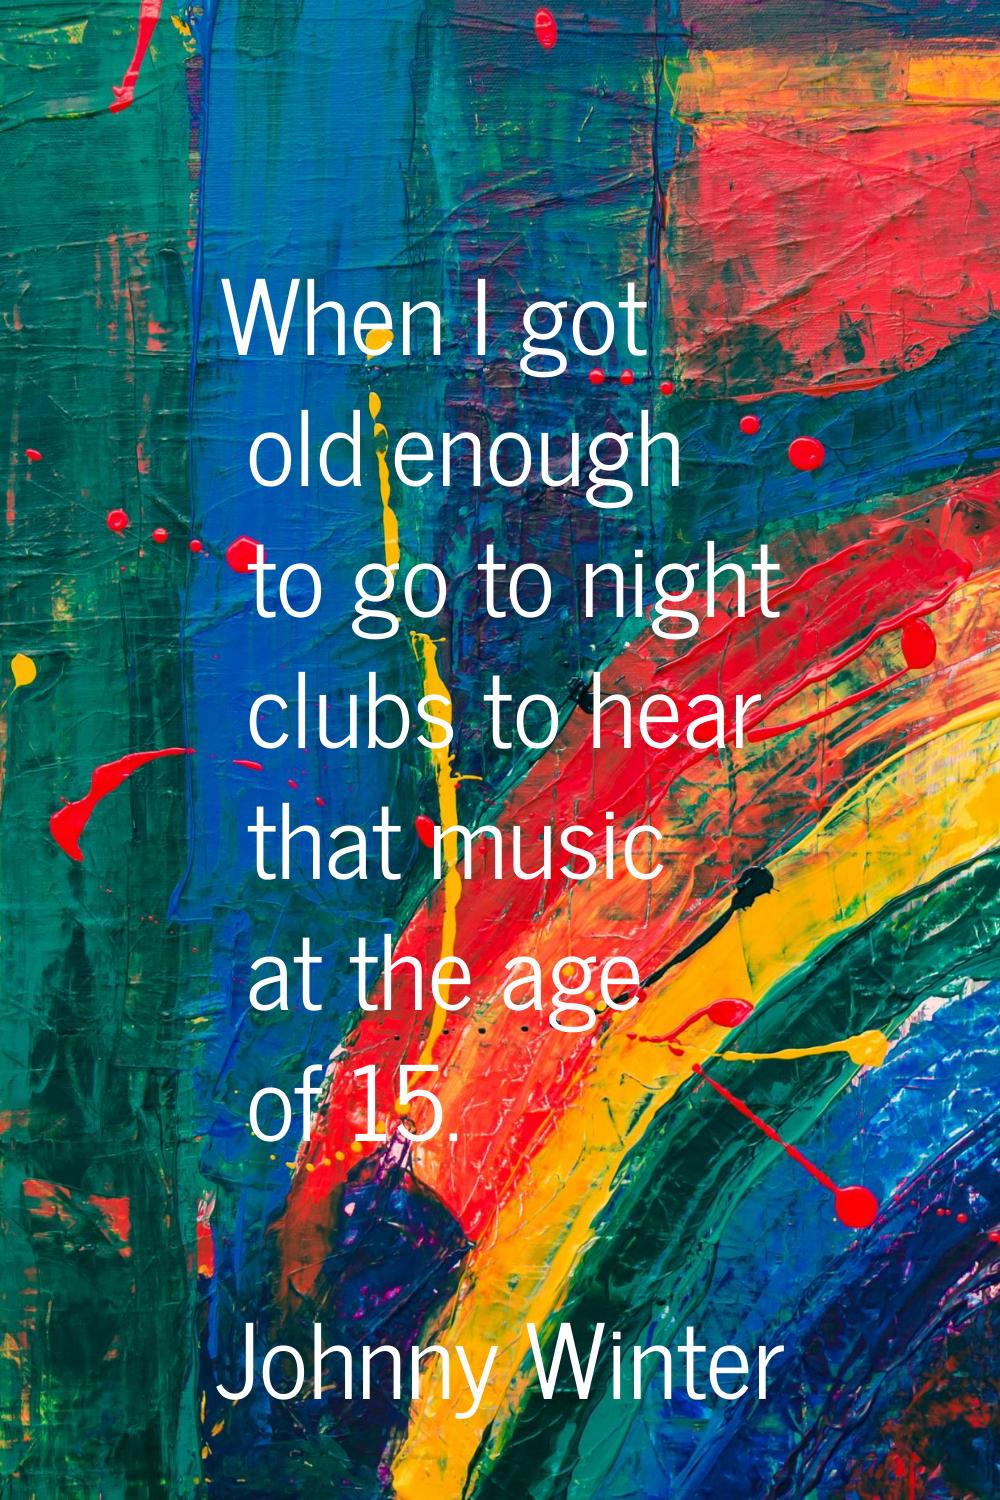 When I got old enough to go to night clubs to hear that music at the age of 15.